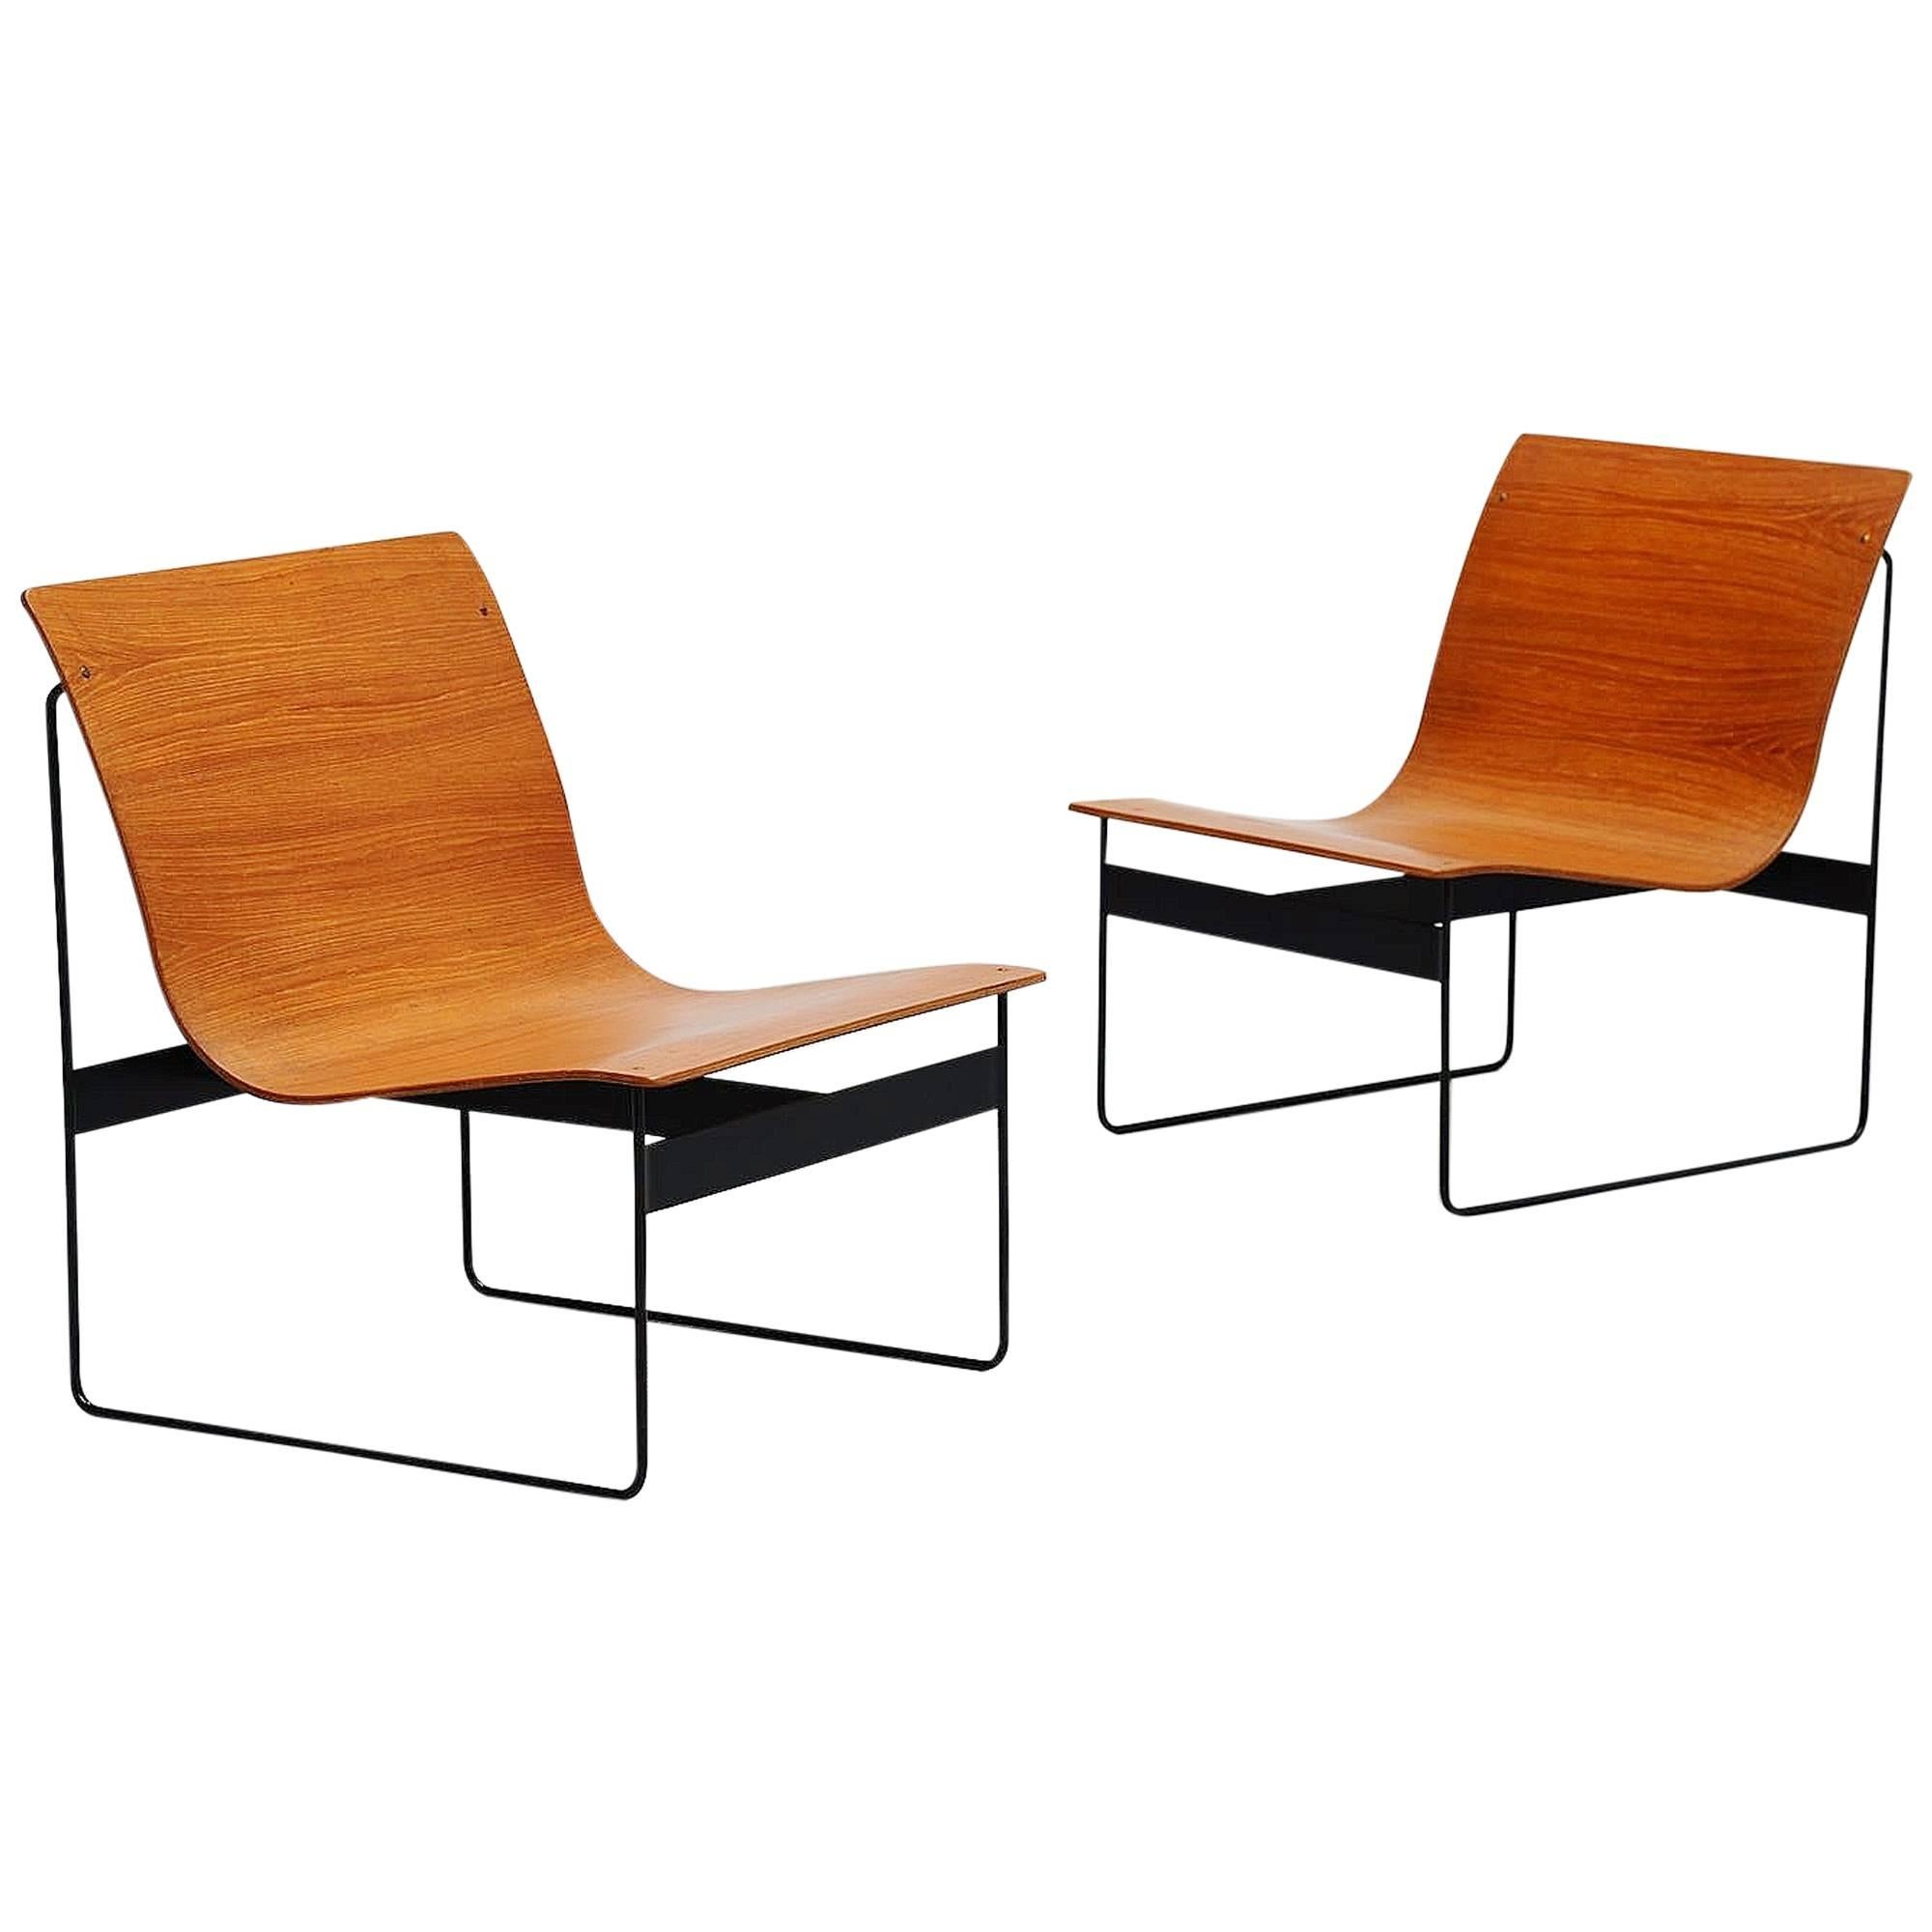 Günter Renkel Lounge Chairs for Rego, Germany, 1959